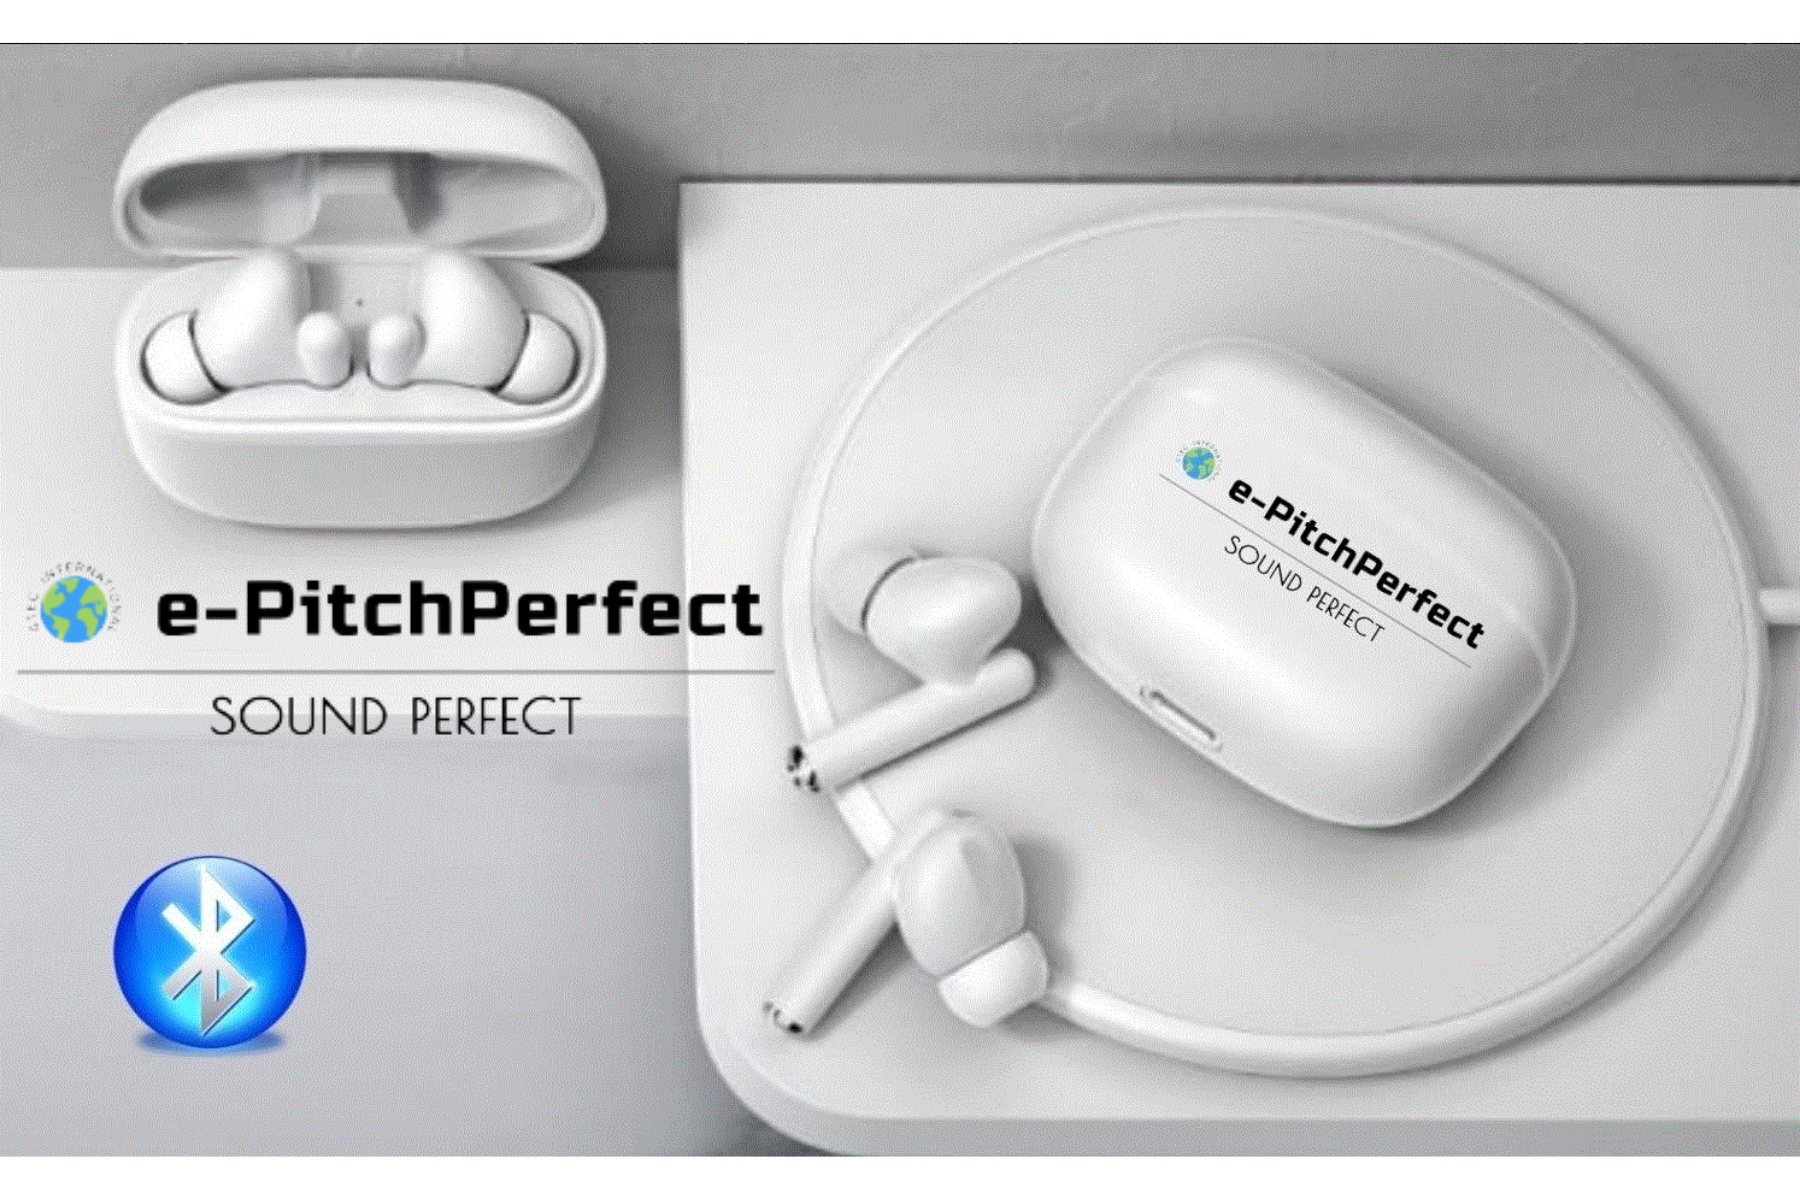 e-PitchPerfect ePP Combo of Wireless Bluetooth Headset Hands-Free and TWS Bluetooth Earbuds best sound quality with Built-In Microphone for HD Calling Sold 10,000+ worldwide